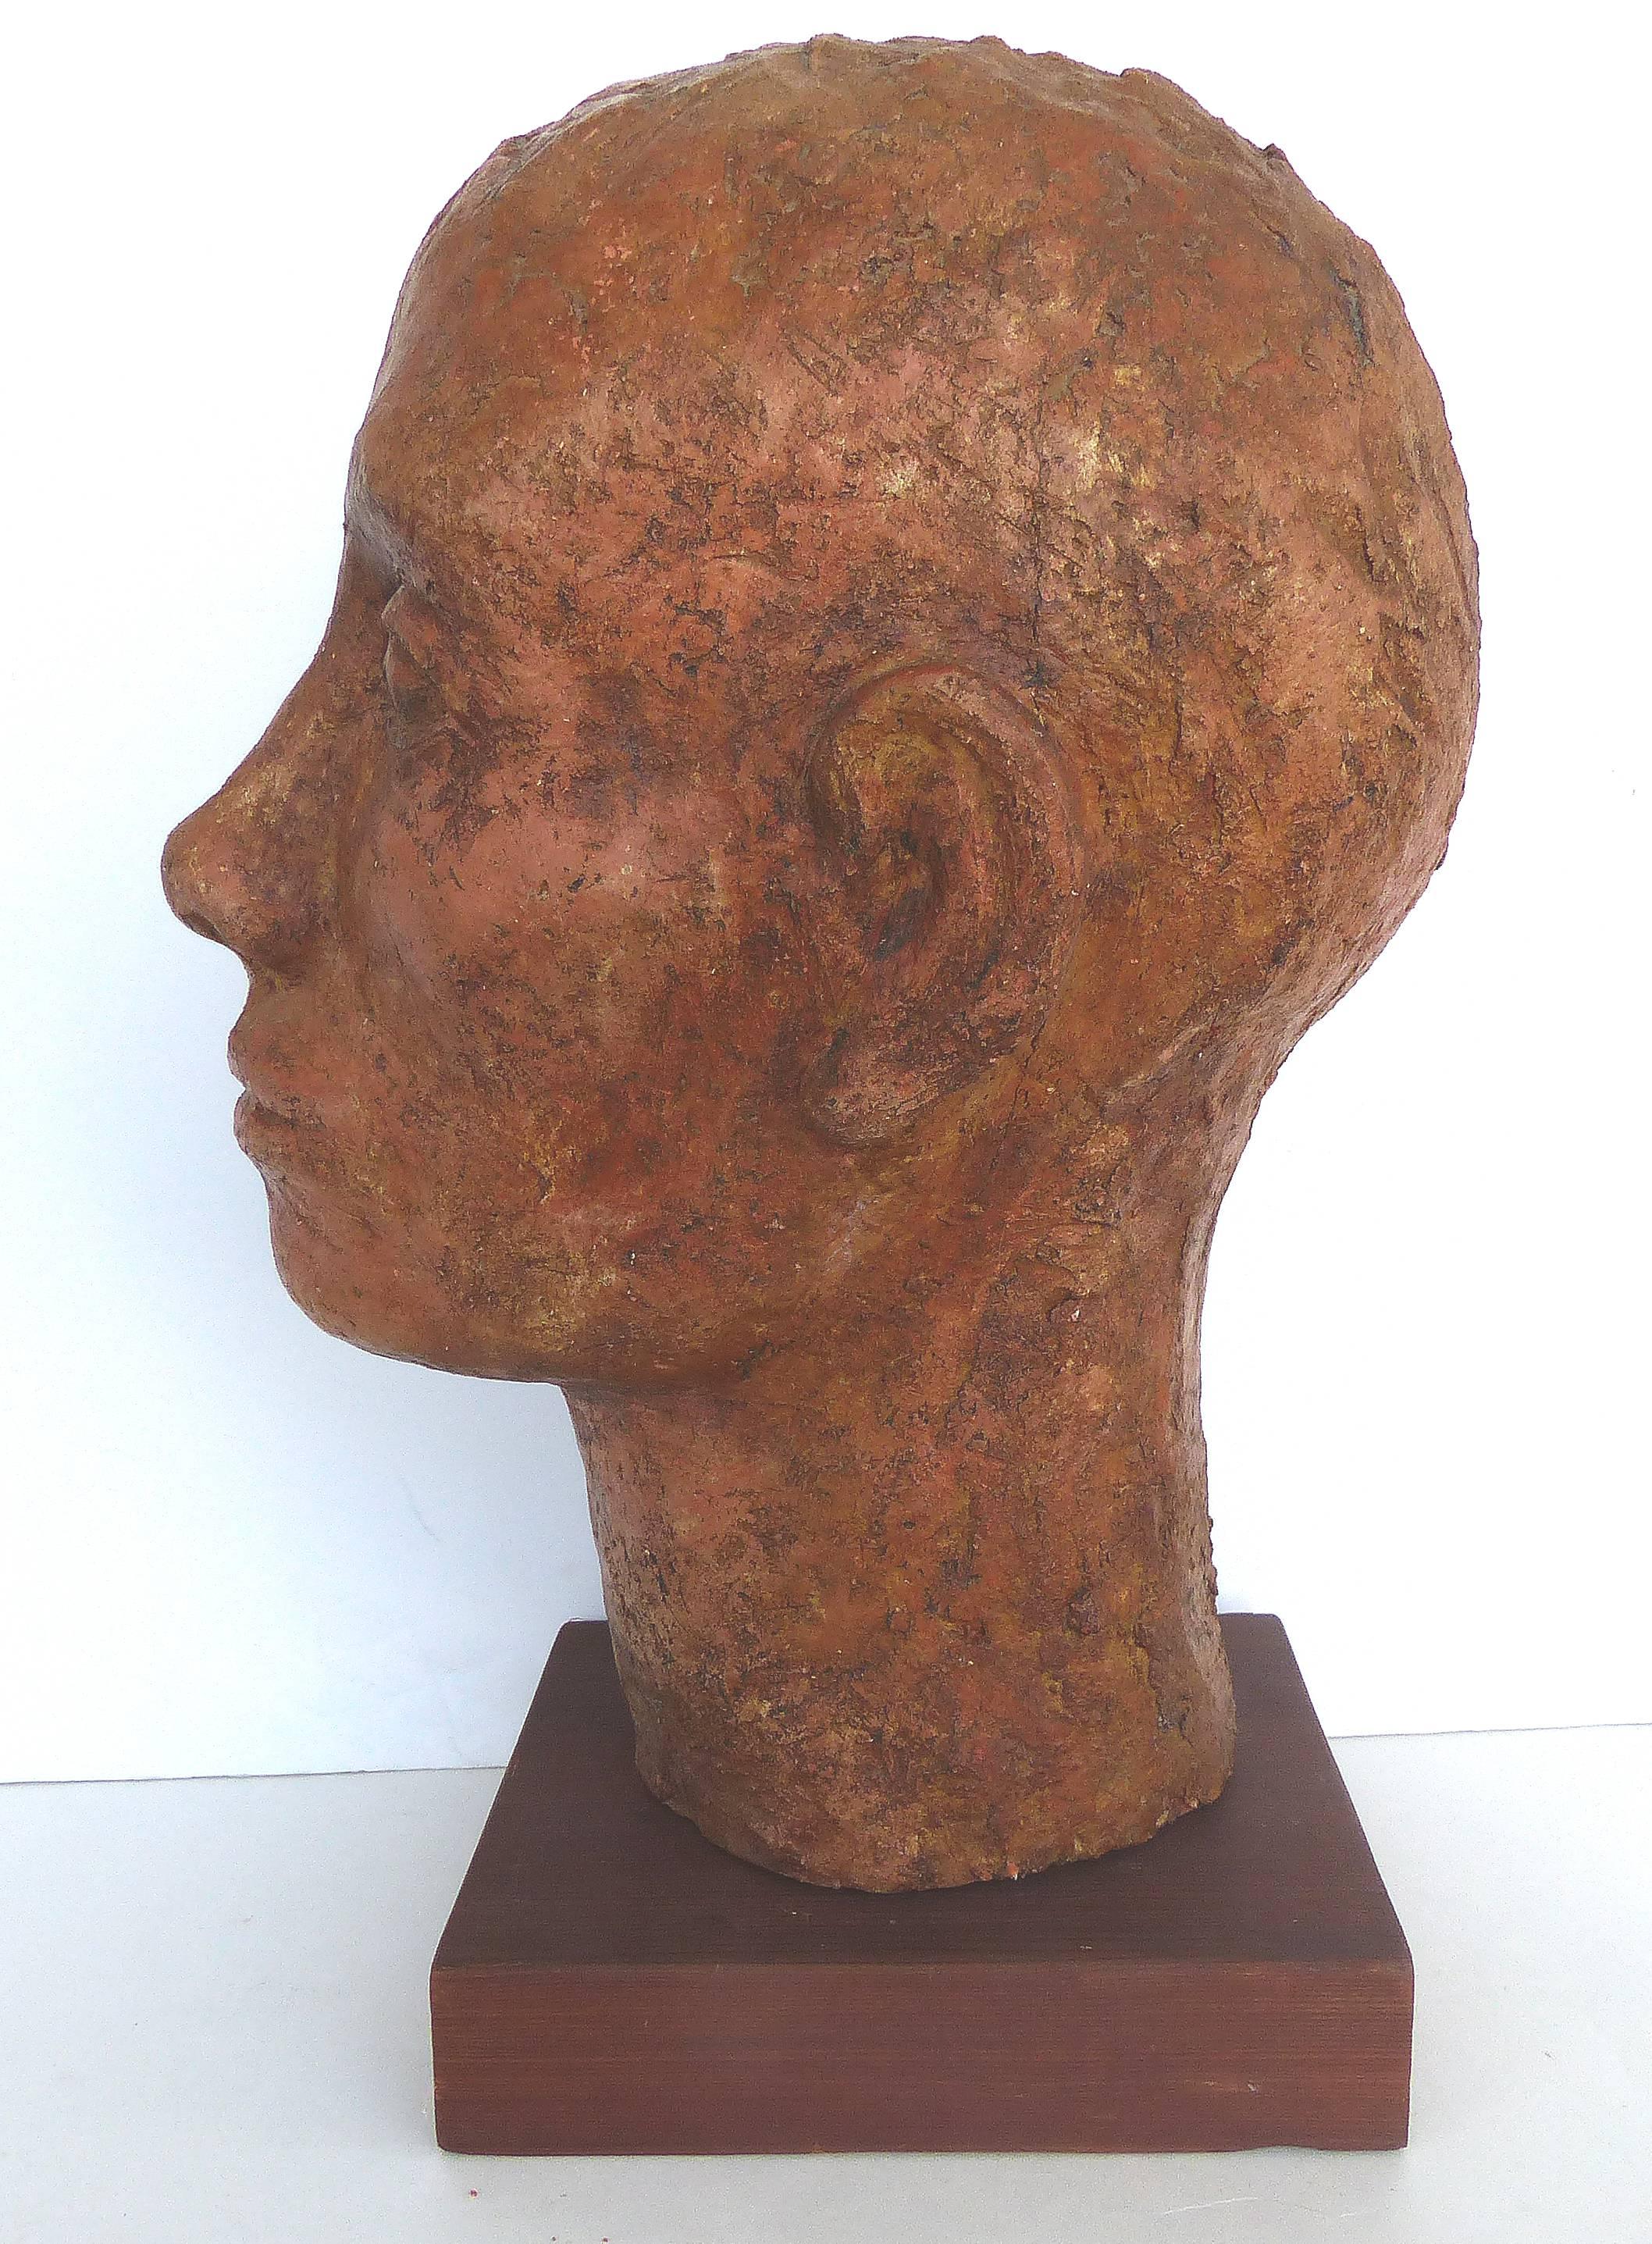 Terracotta Head Sculpture on a Wood Base

Offered for sale is a terracotta sculpture of a man's head which is illegibly signed on the bottom. The sculpture is rustic in nature with a textured finish. The sculpture rests upon a wood plinth which